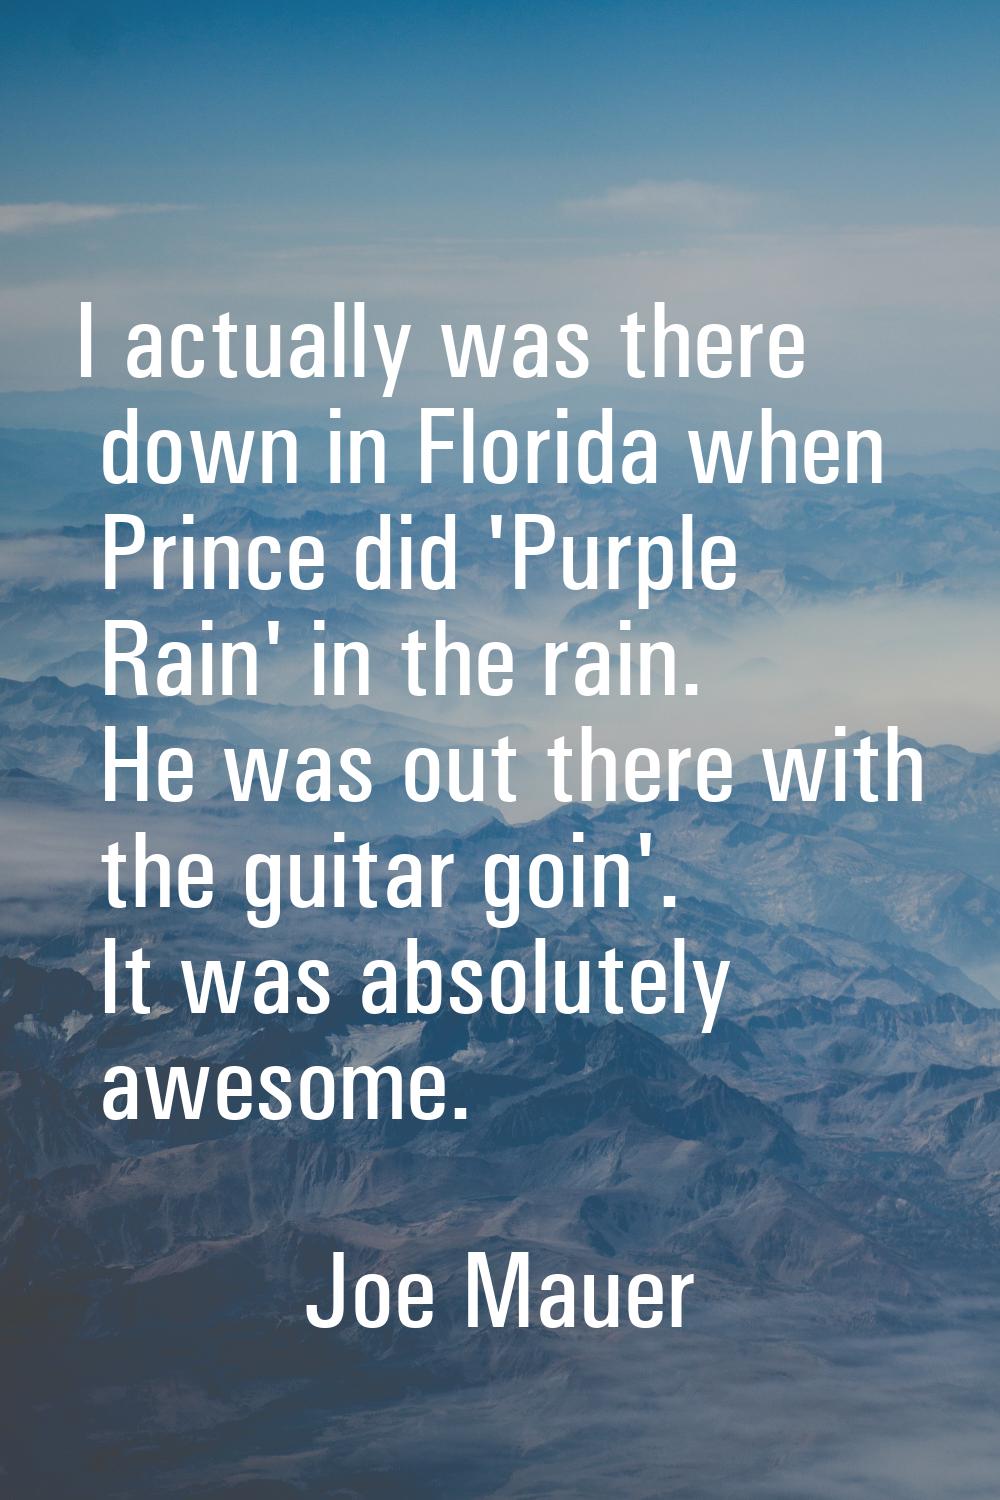 I actually was there down in Florida when Prince did 'Purple Rain' in the rain. He was out there wi